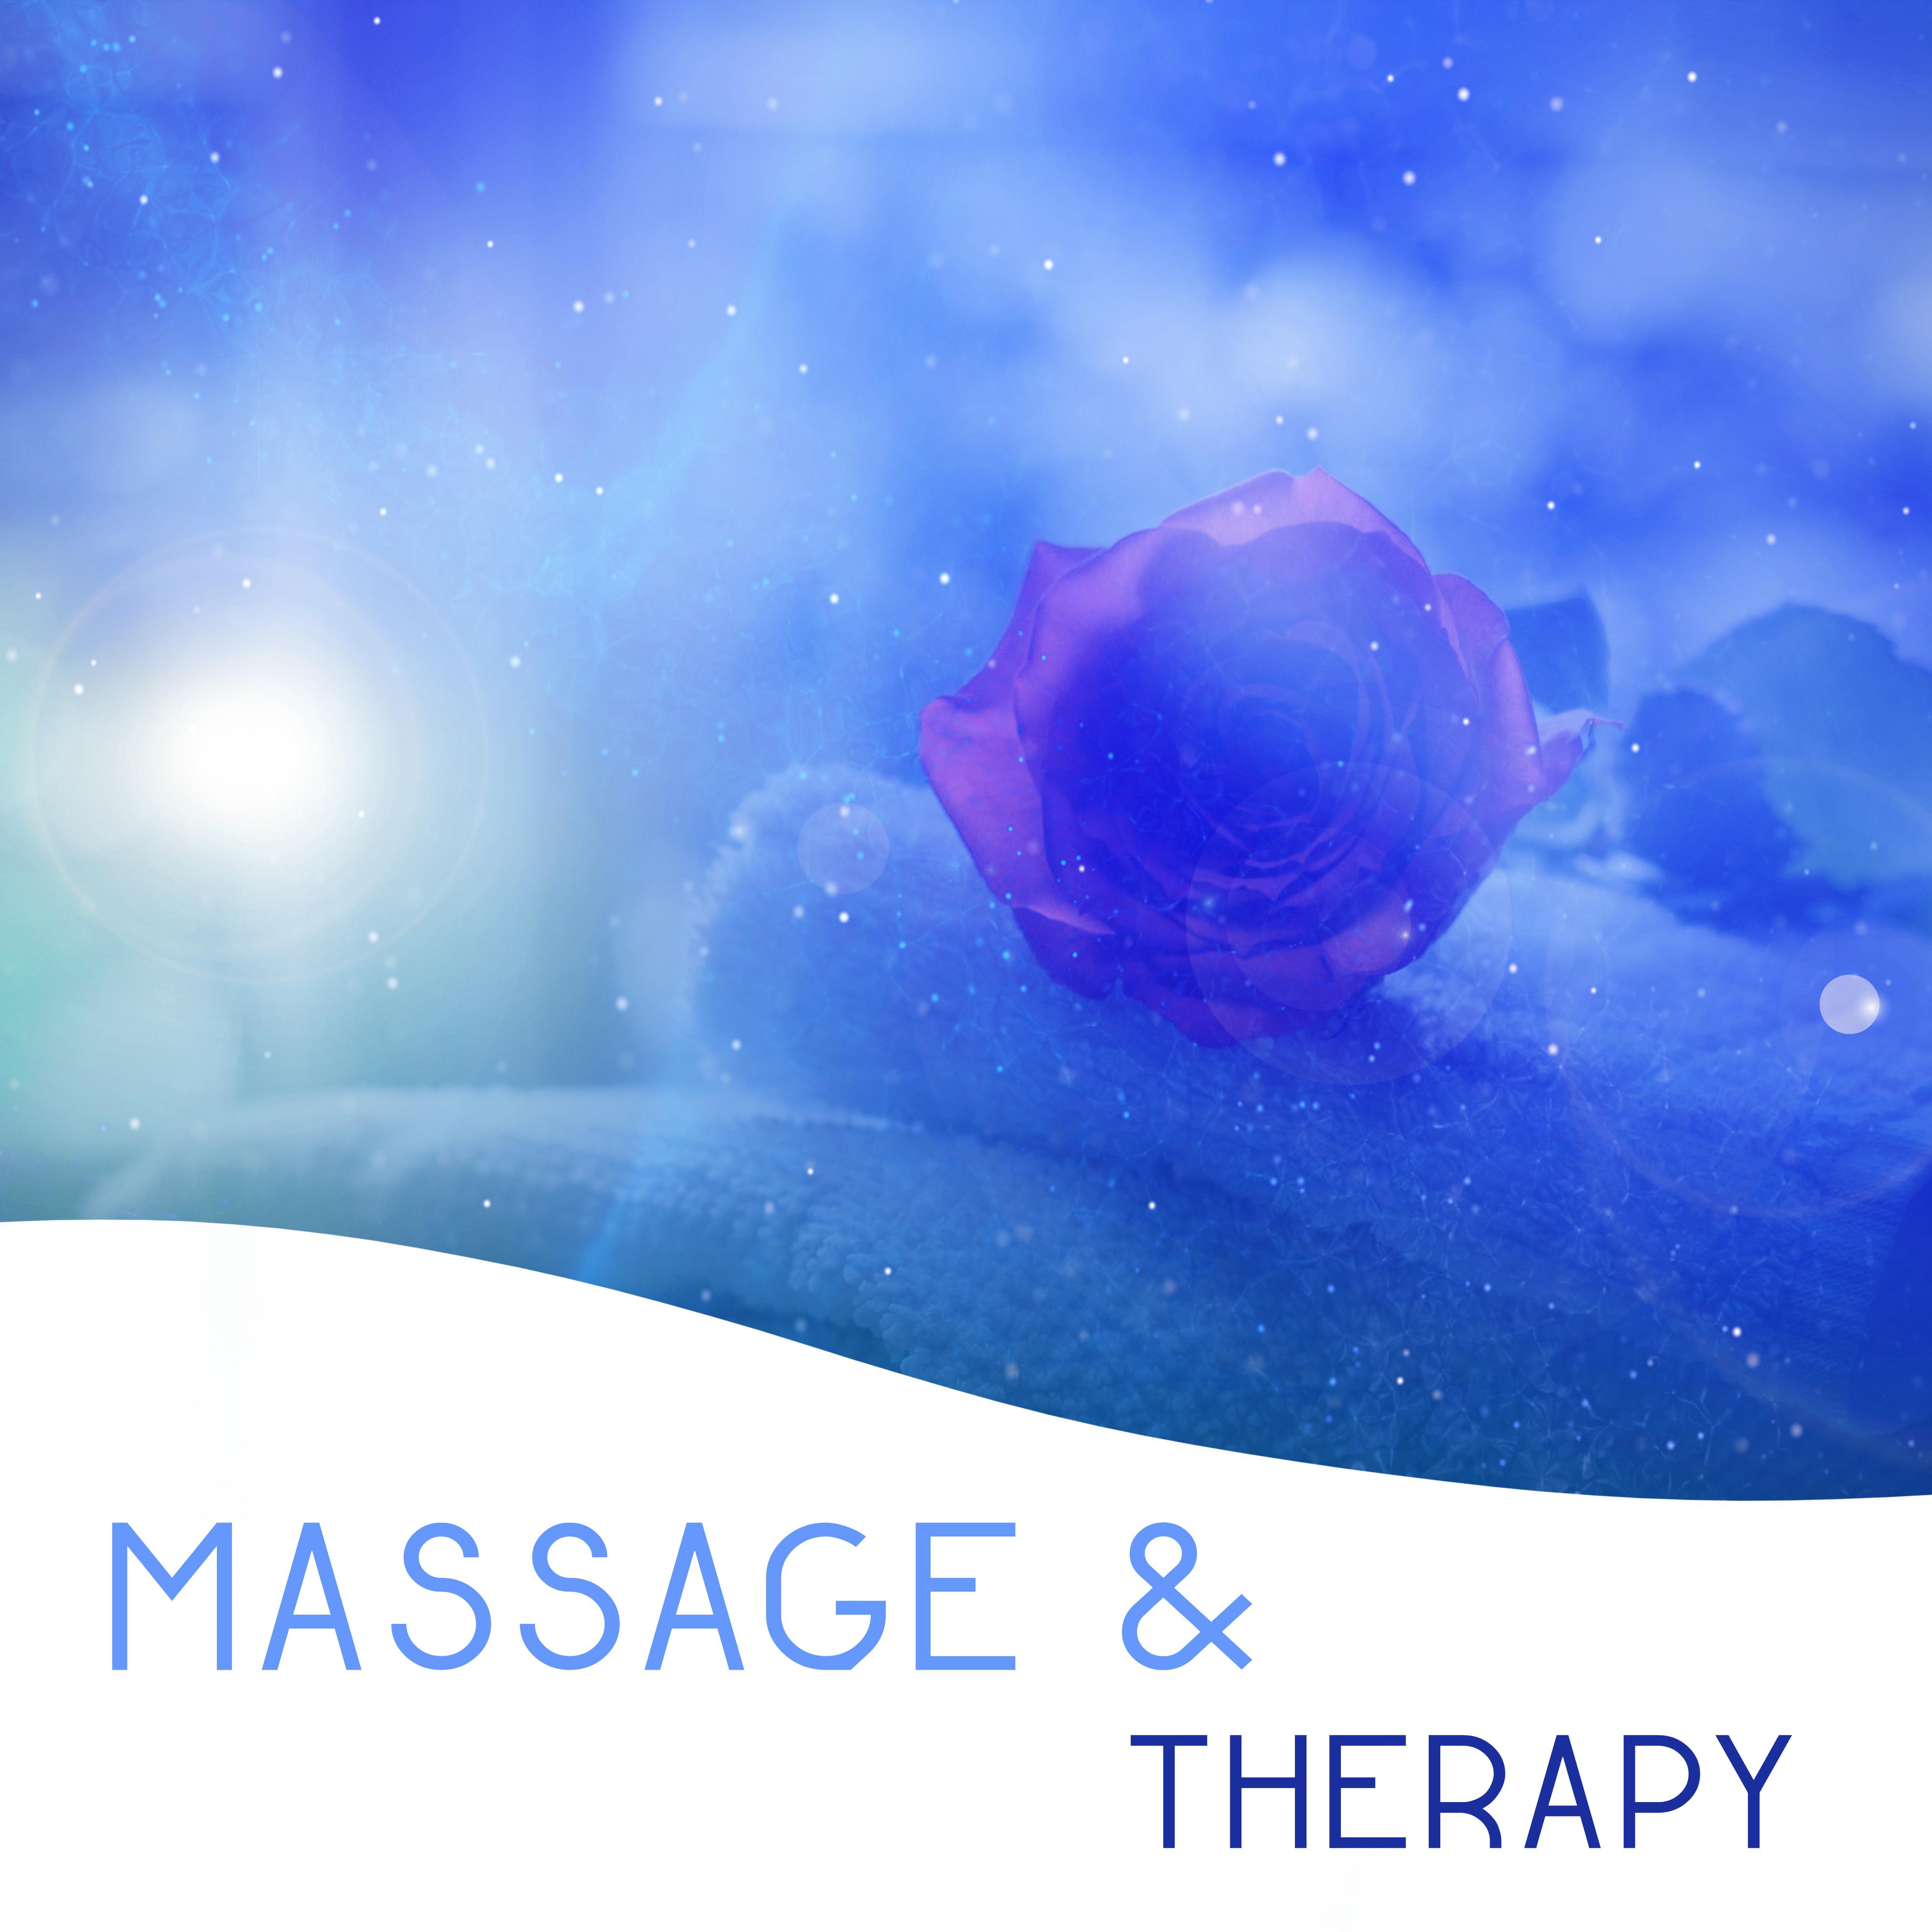 Massage & Therapy – Soft Spa Music, Stress Relief, Nature Sounds for Relaxation, Wellness, Deep Massage, Soothing Guitar, Delicate Rain